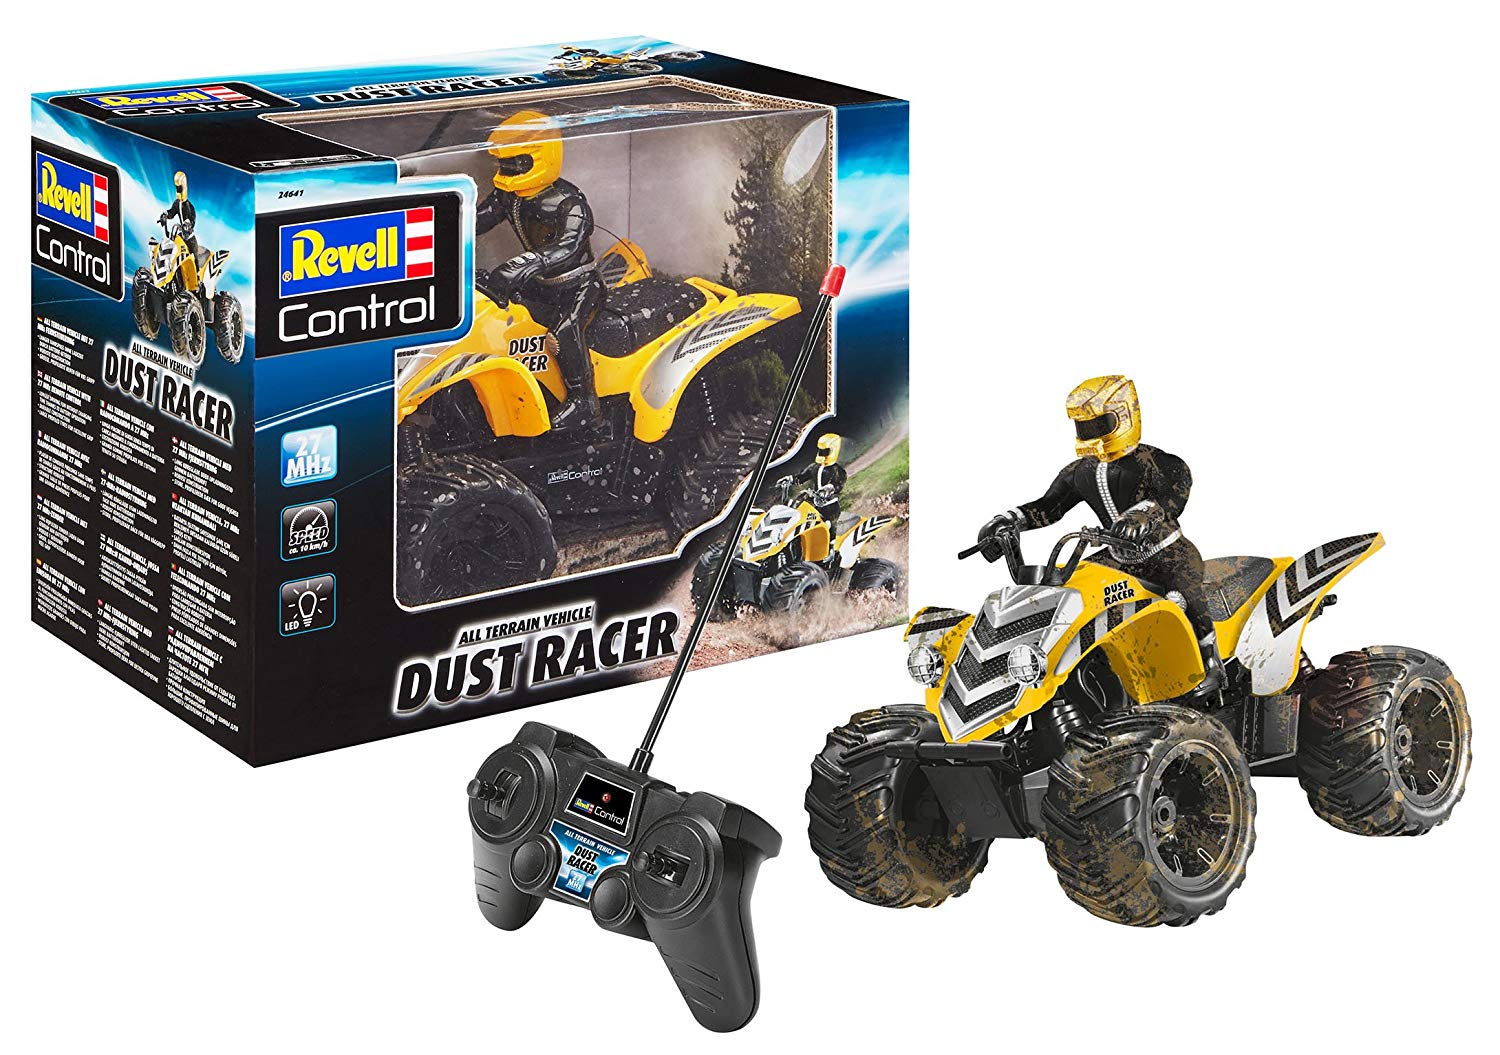 Revell Control Quad New Racer Stardust Beads Mhz Remote Control Entry Level High P